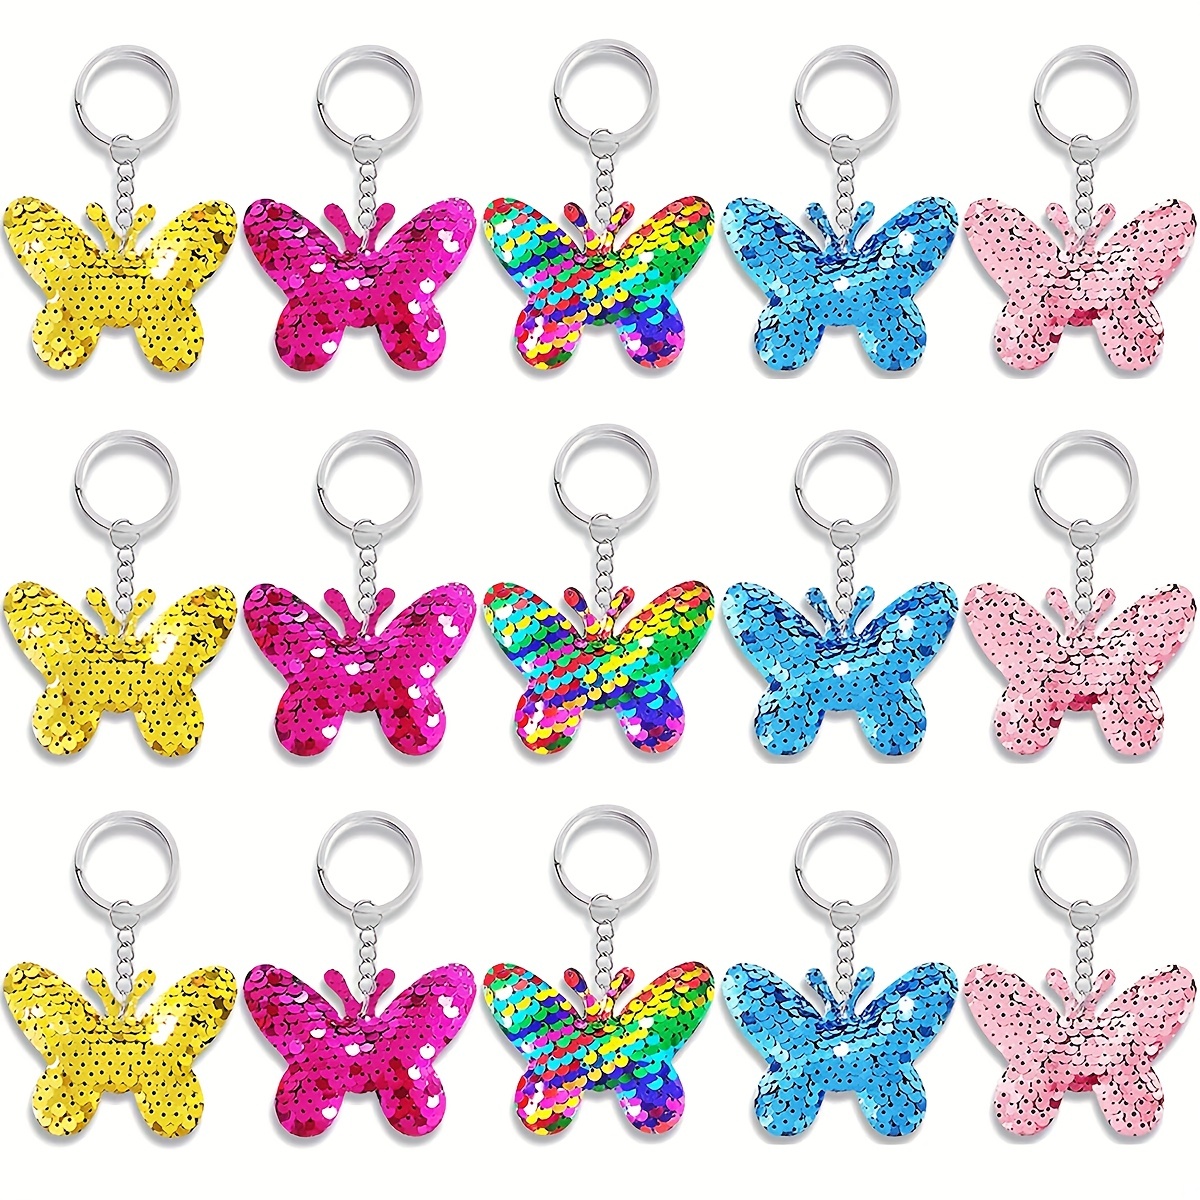 JewelbeautyGold Tone Cute Butterfly Bag Charm Keychain Car Key Chain with  Key Rings for Women Girls Gifts